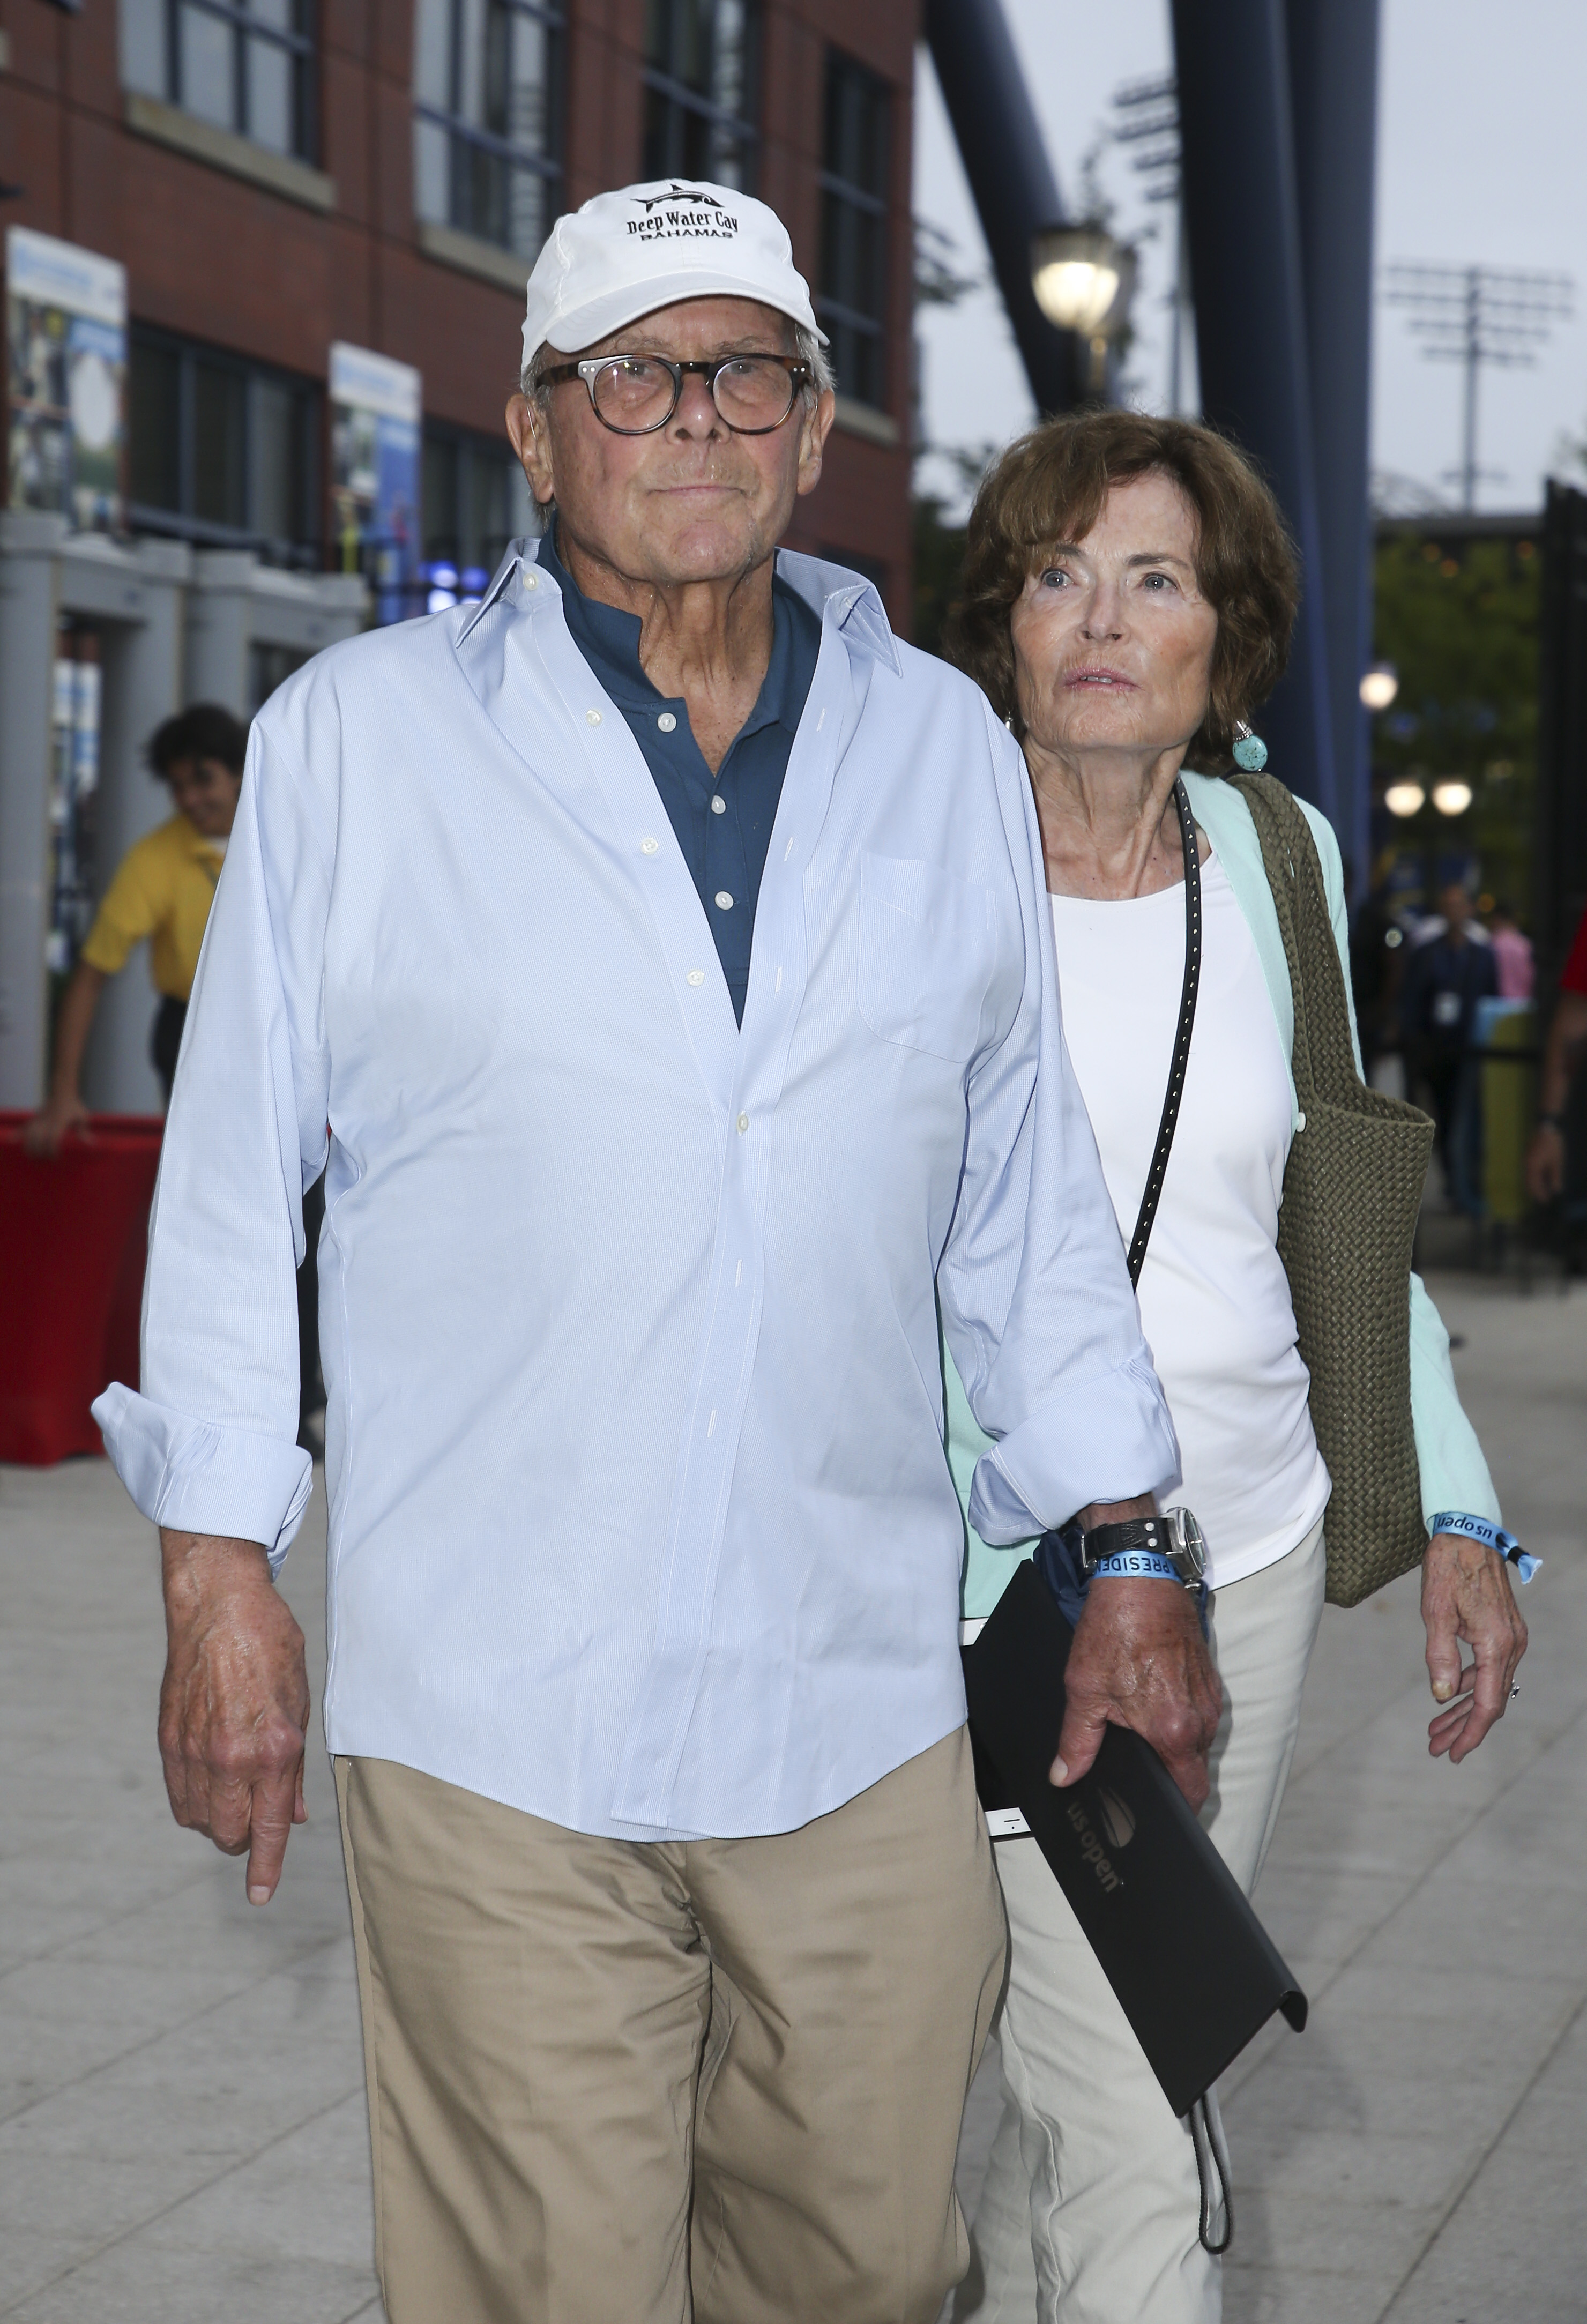 Tom Brokaw and Meredith Auld on day 12 of the US Open Men's Semifinals at the USTA Billie Jean King National Tennis Center on September 7, 2018, in Flushing Meadows, Queens, New York City | Source: Getty Images